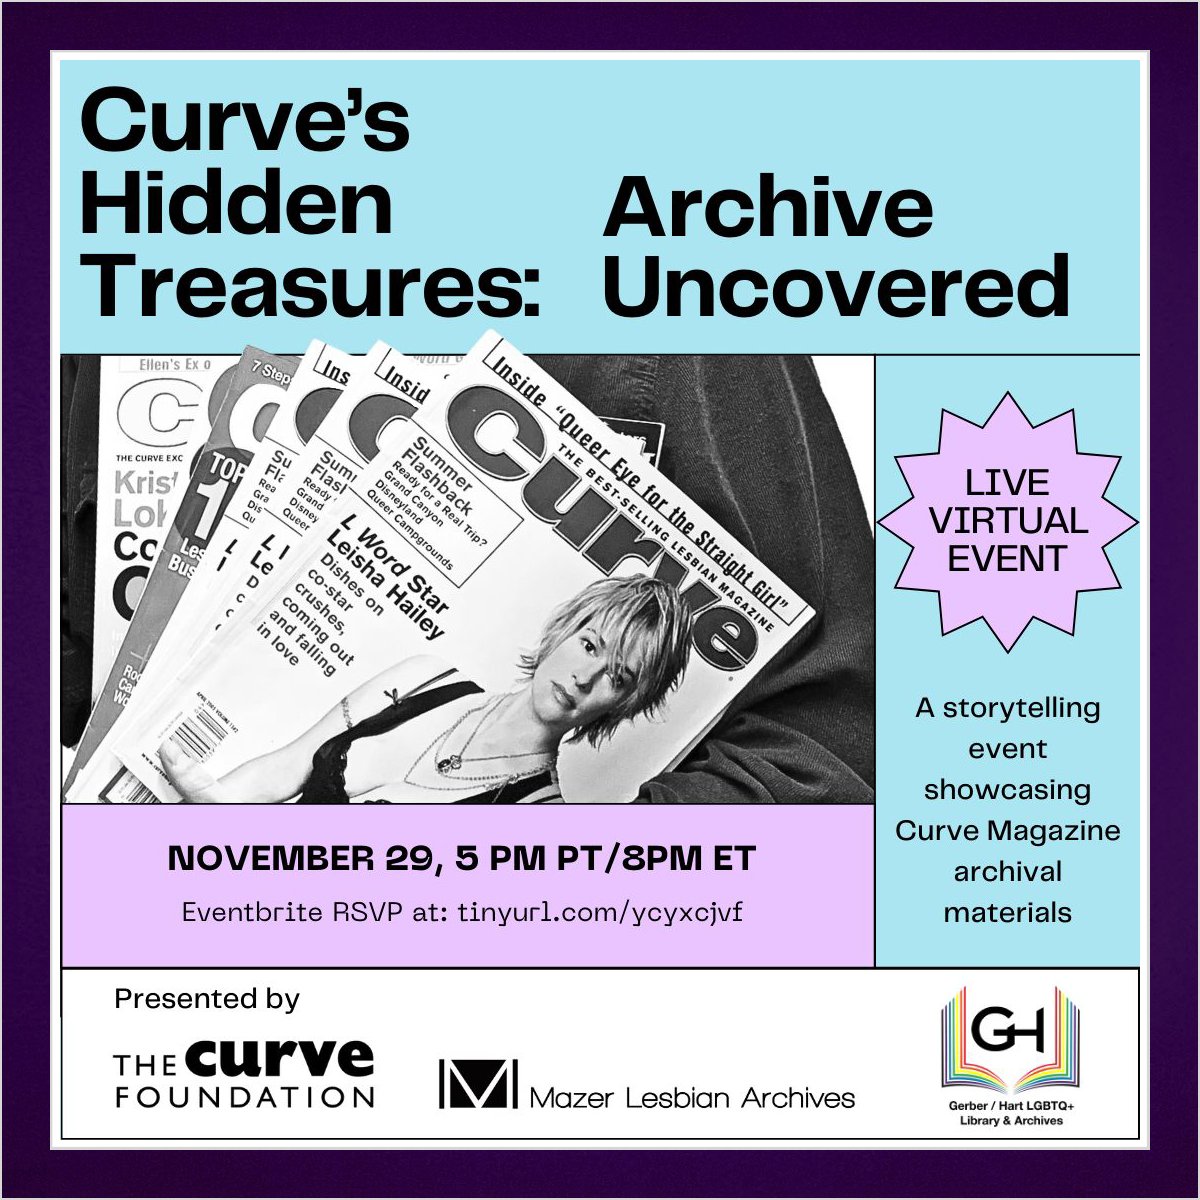 You're invited! RSVP for a FREE virtual storytelling event to showcase Curve's archival materials housed at The June Mazer Lesbian Archives, Gerber/Hart Library & Archives, and from Franco's own collection! 💜 WHEN: Wed, Nov 29, 5pm PT/ 8pm ET RSVP: 👉 tinyurl.com/ycyxcjvf